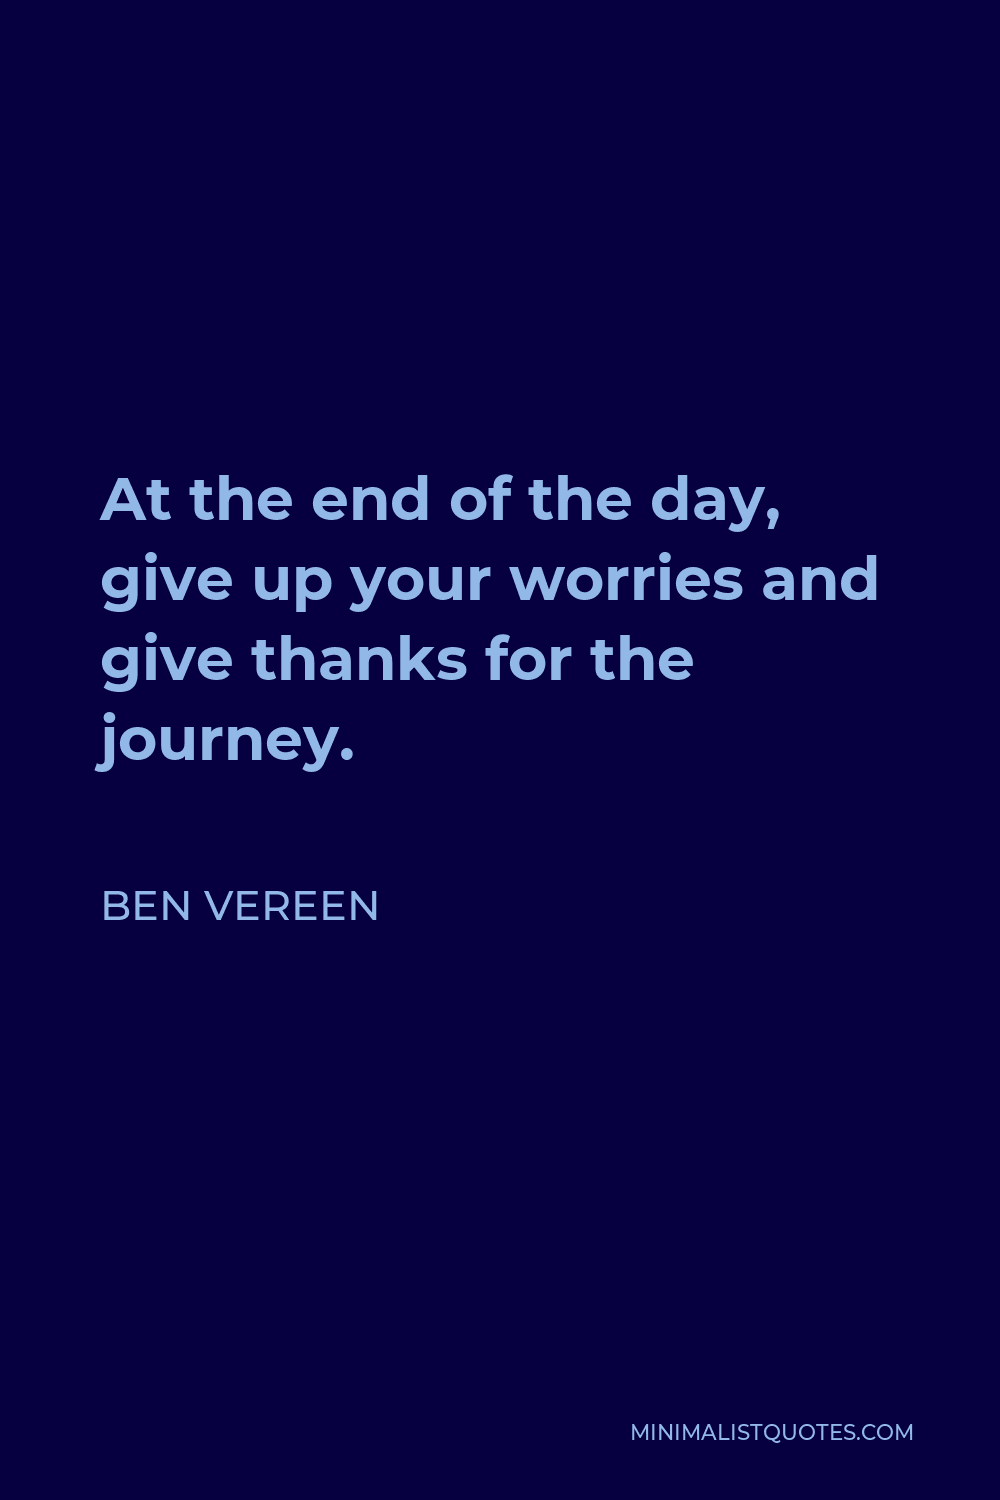 Ben Vereen Quote - At the end of the day, give up your worries and give thanks for the journey.